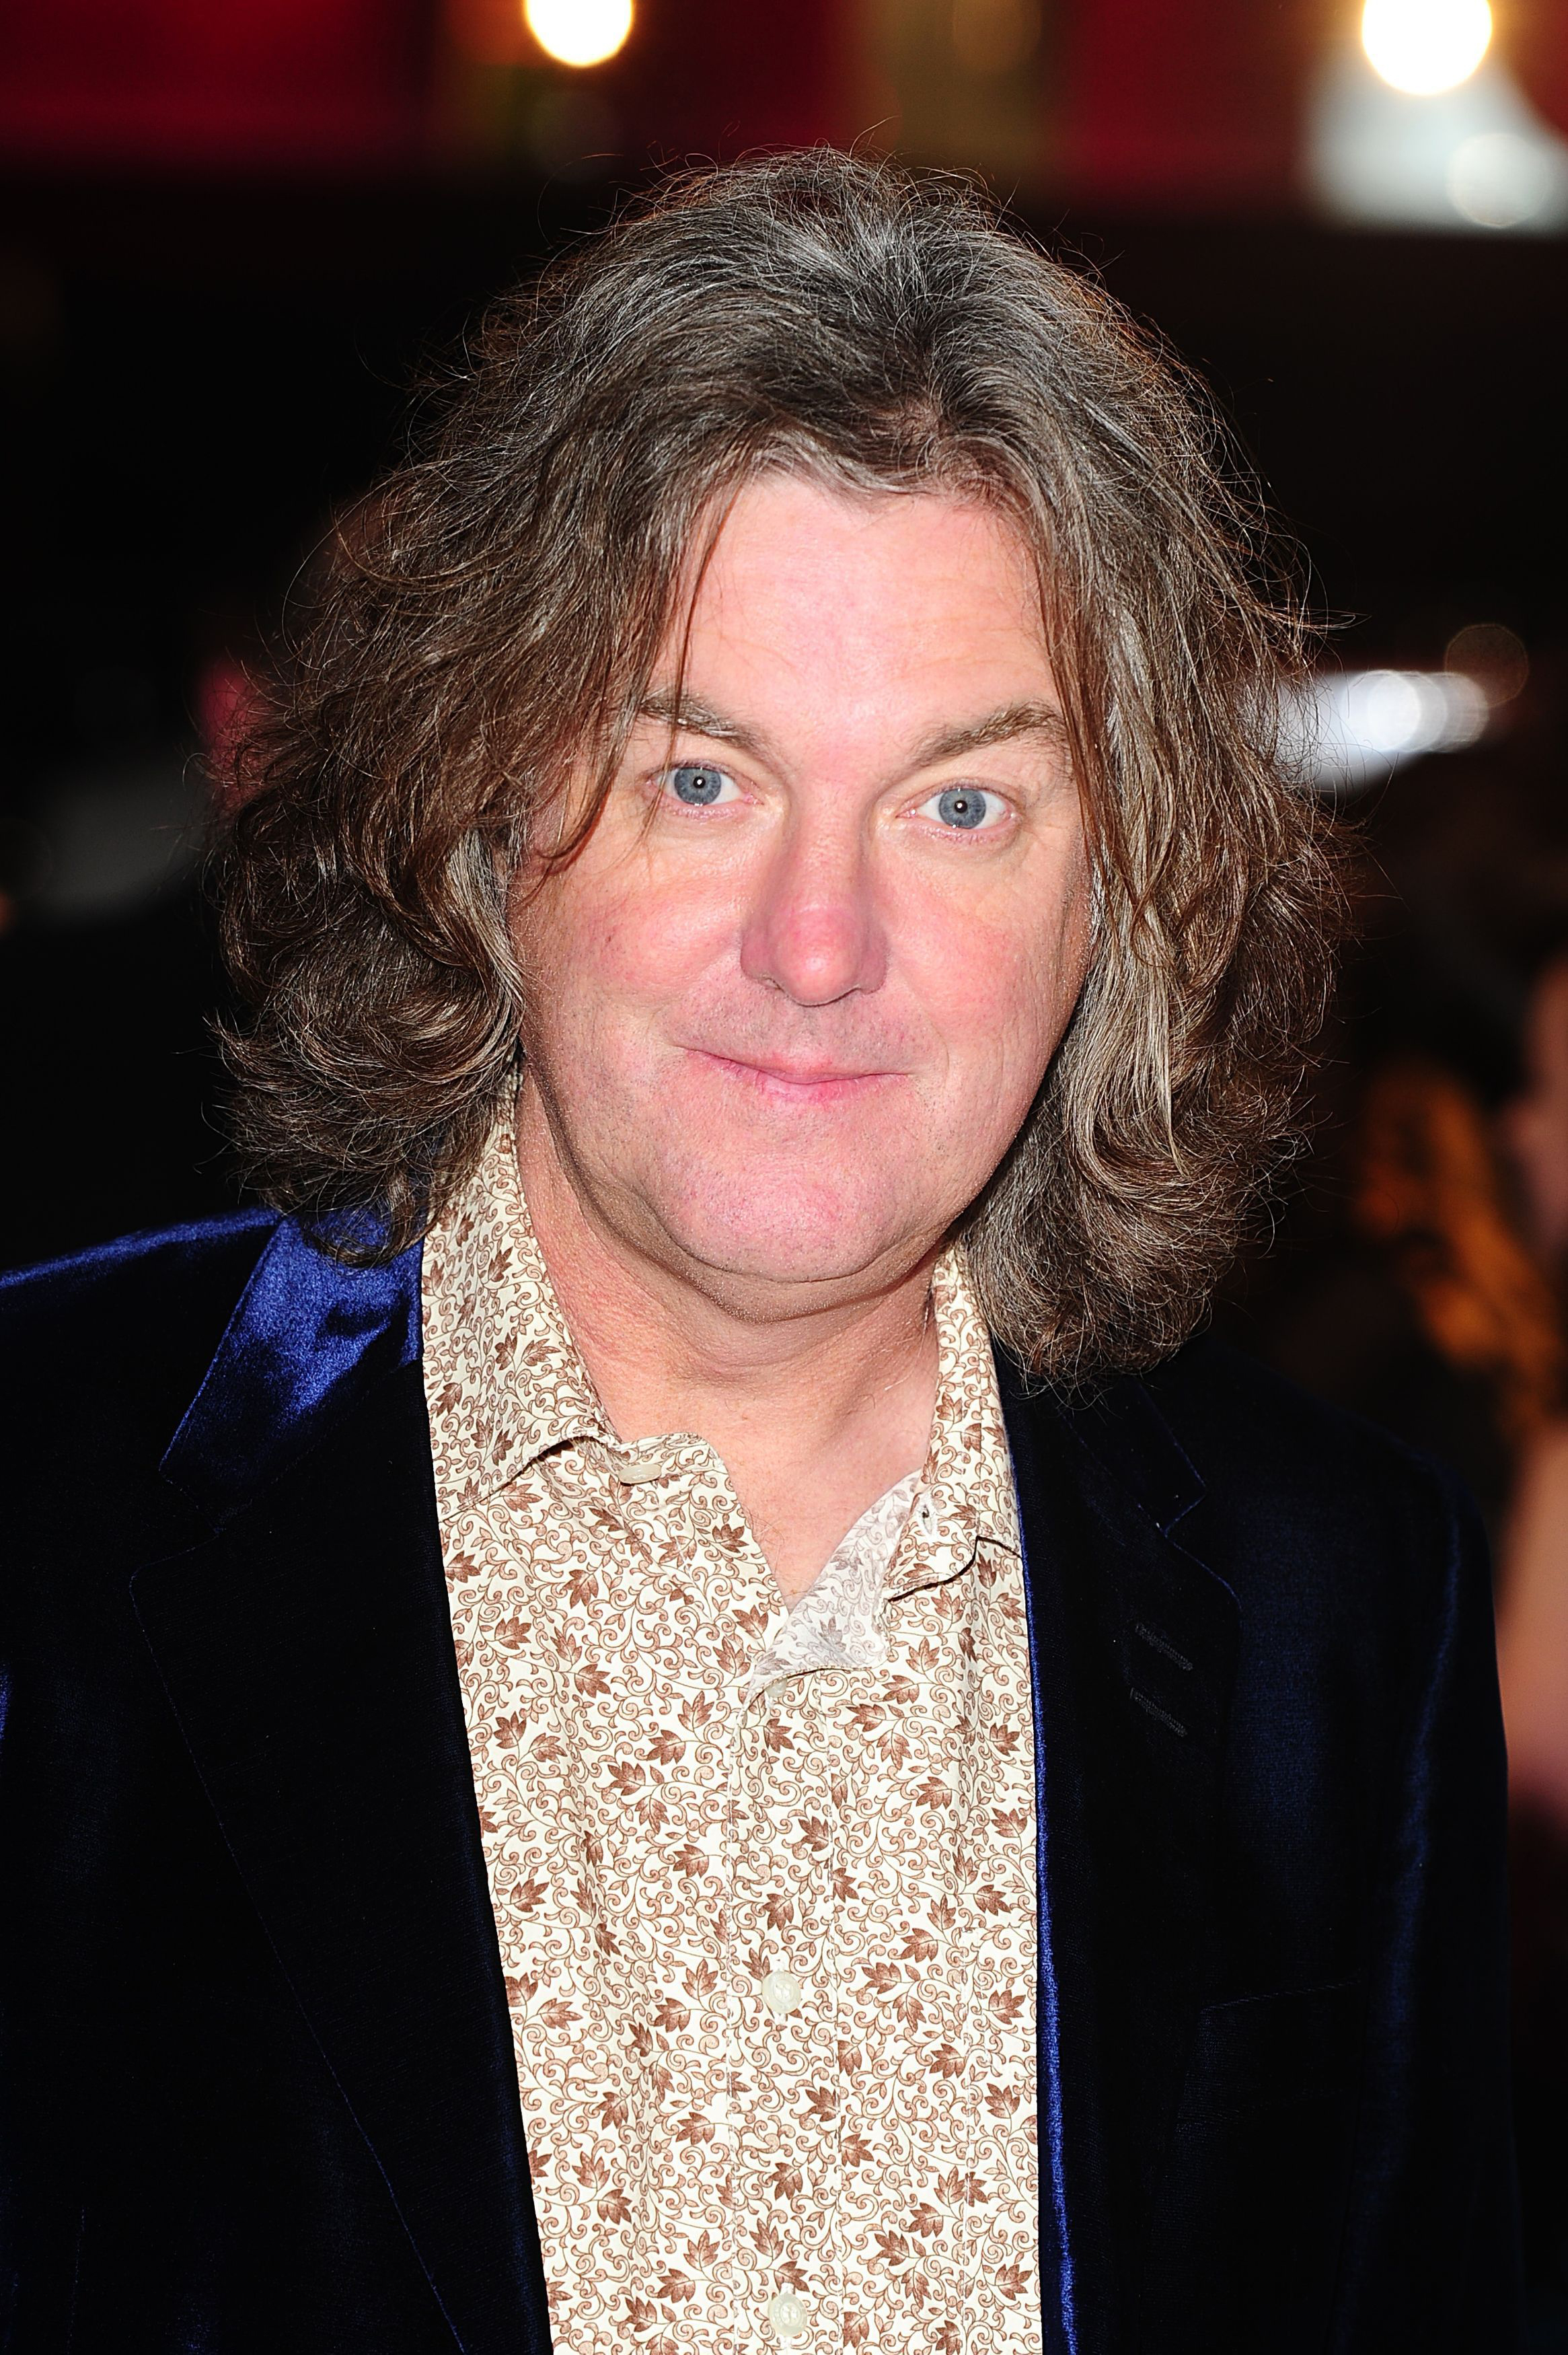 James May interview